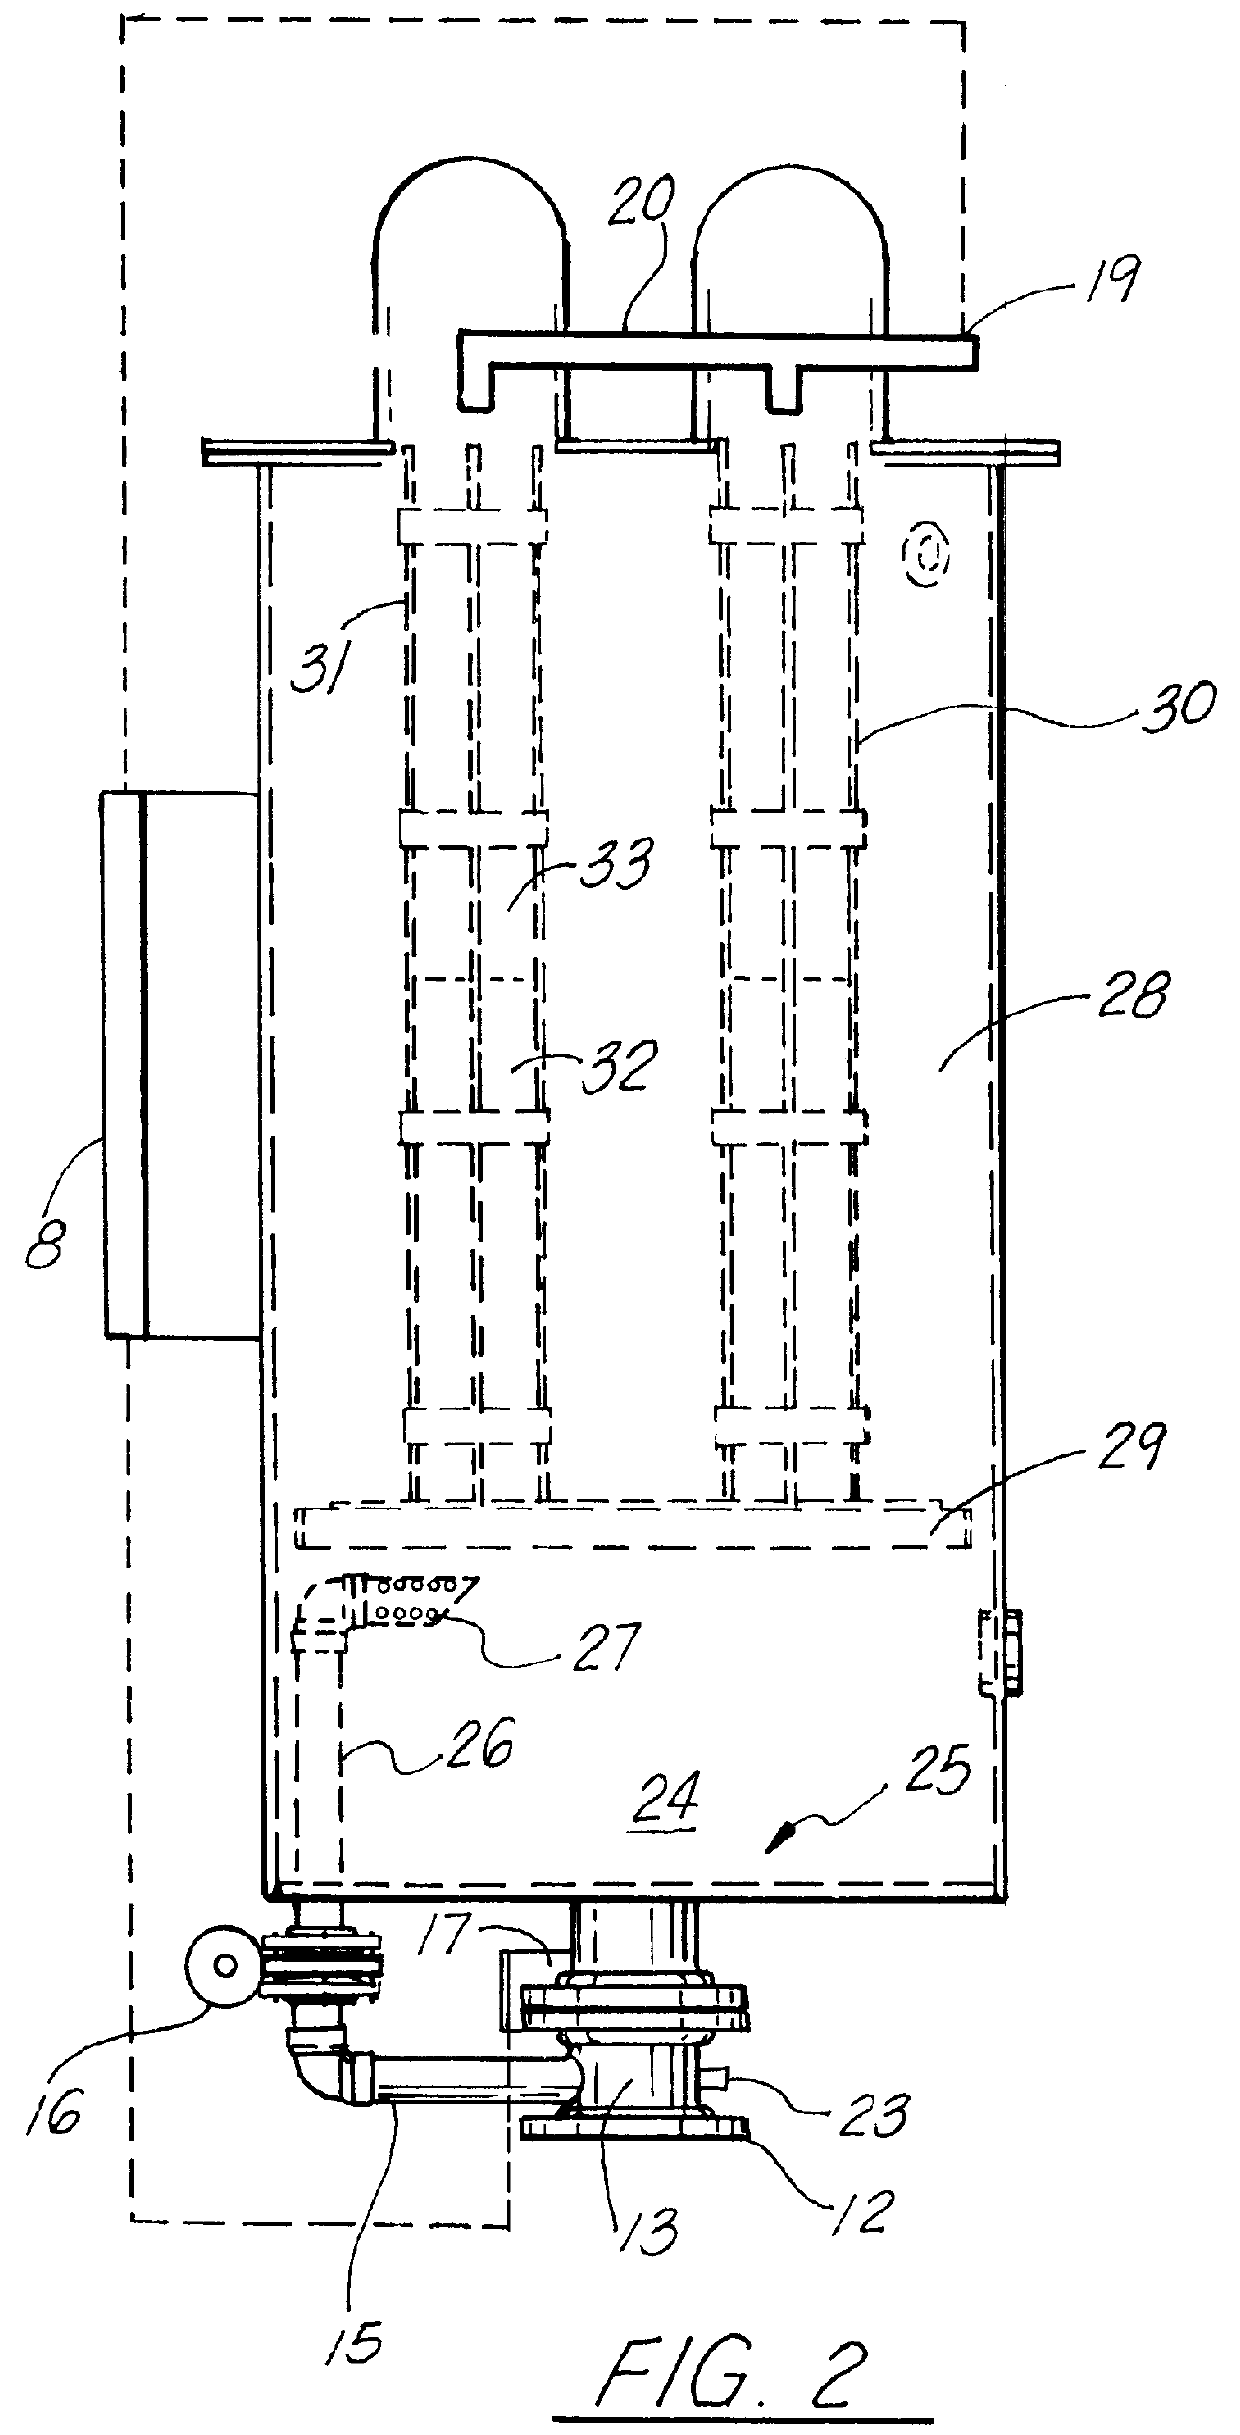 System for depressurizing, filtering, and noise suppression of high pressure pneumatic vessels